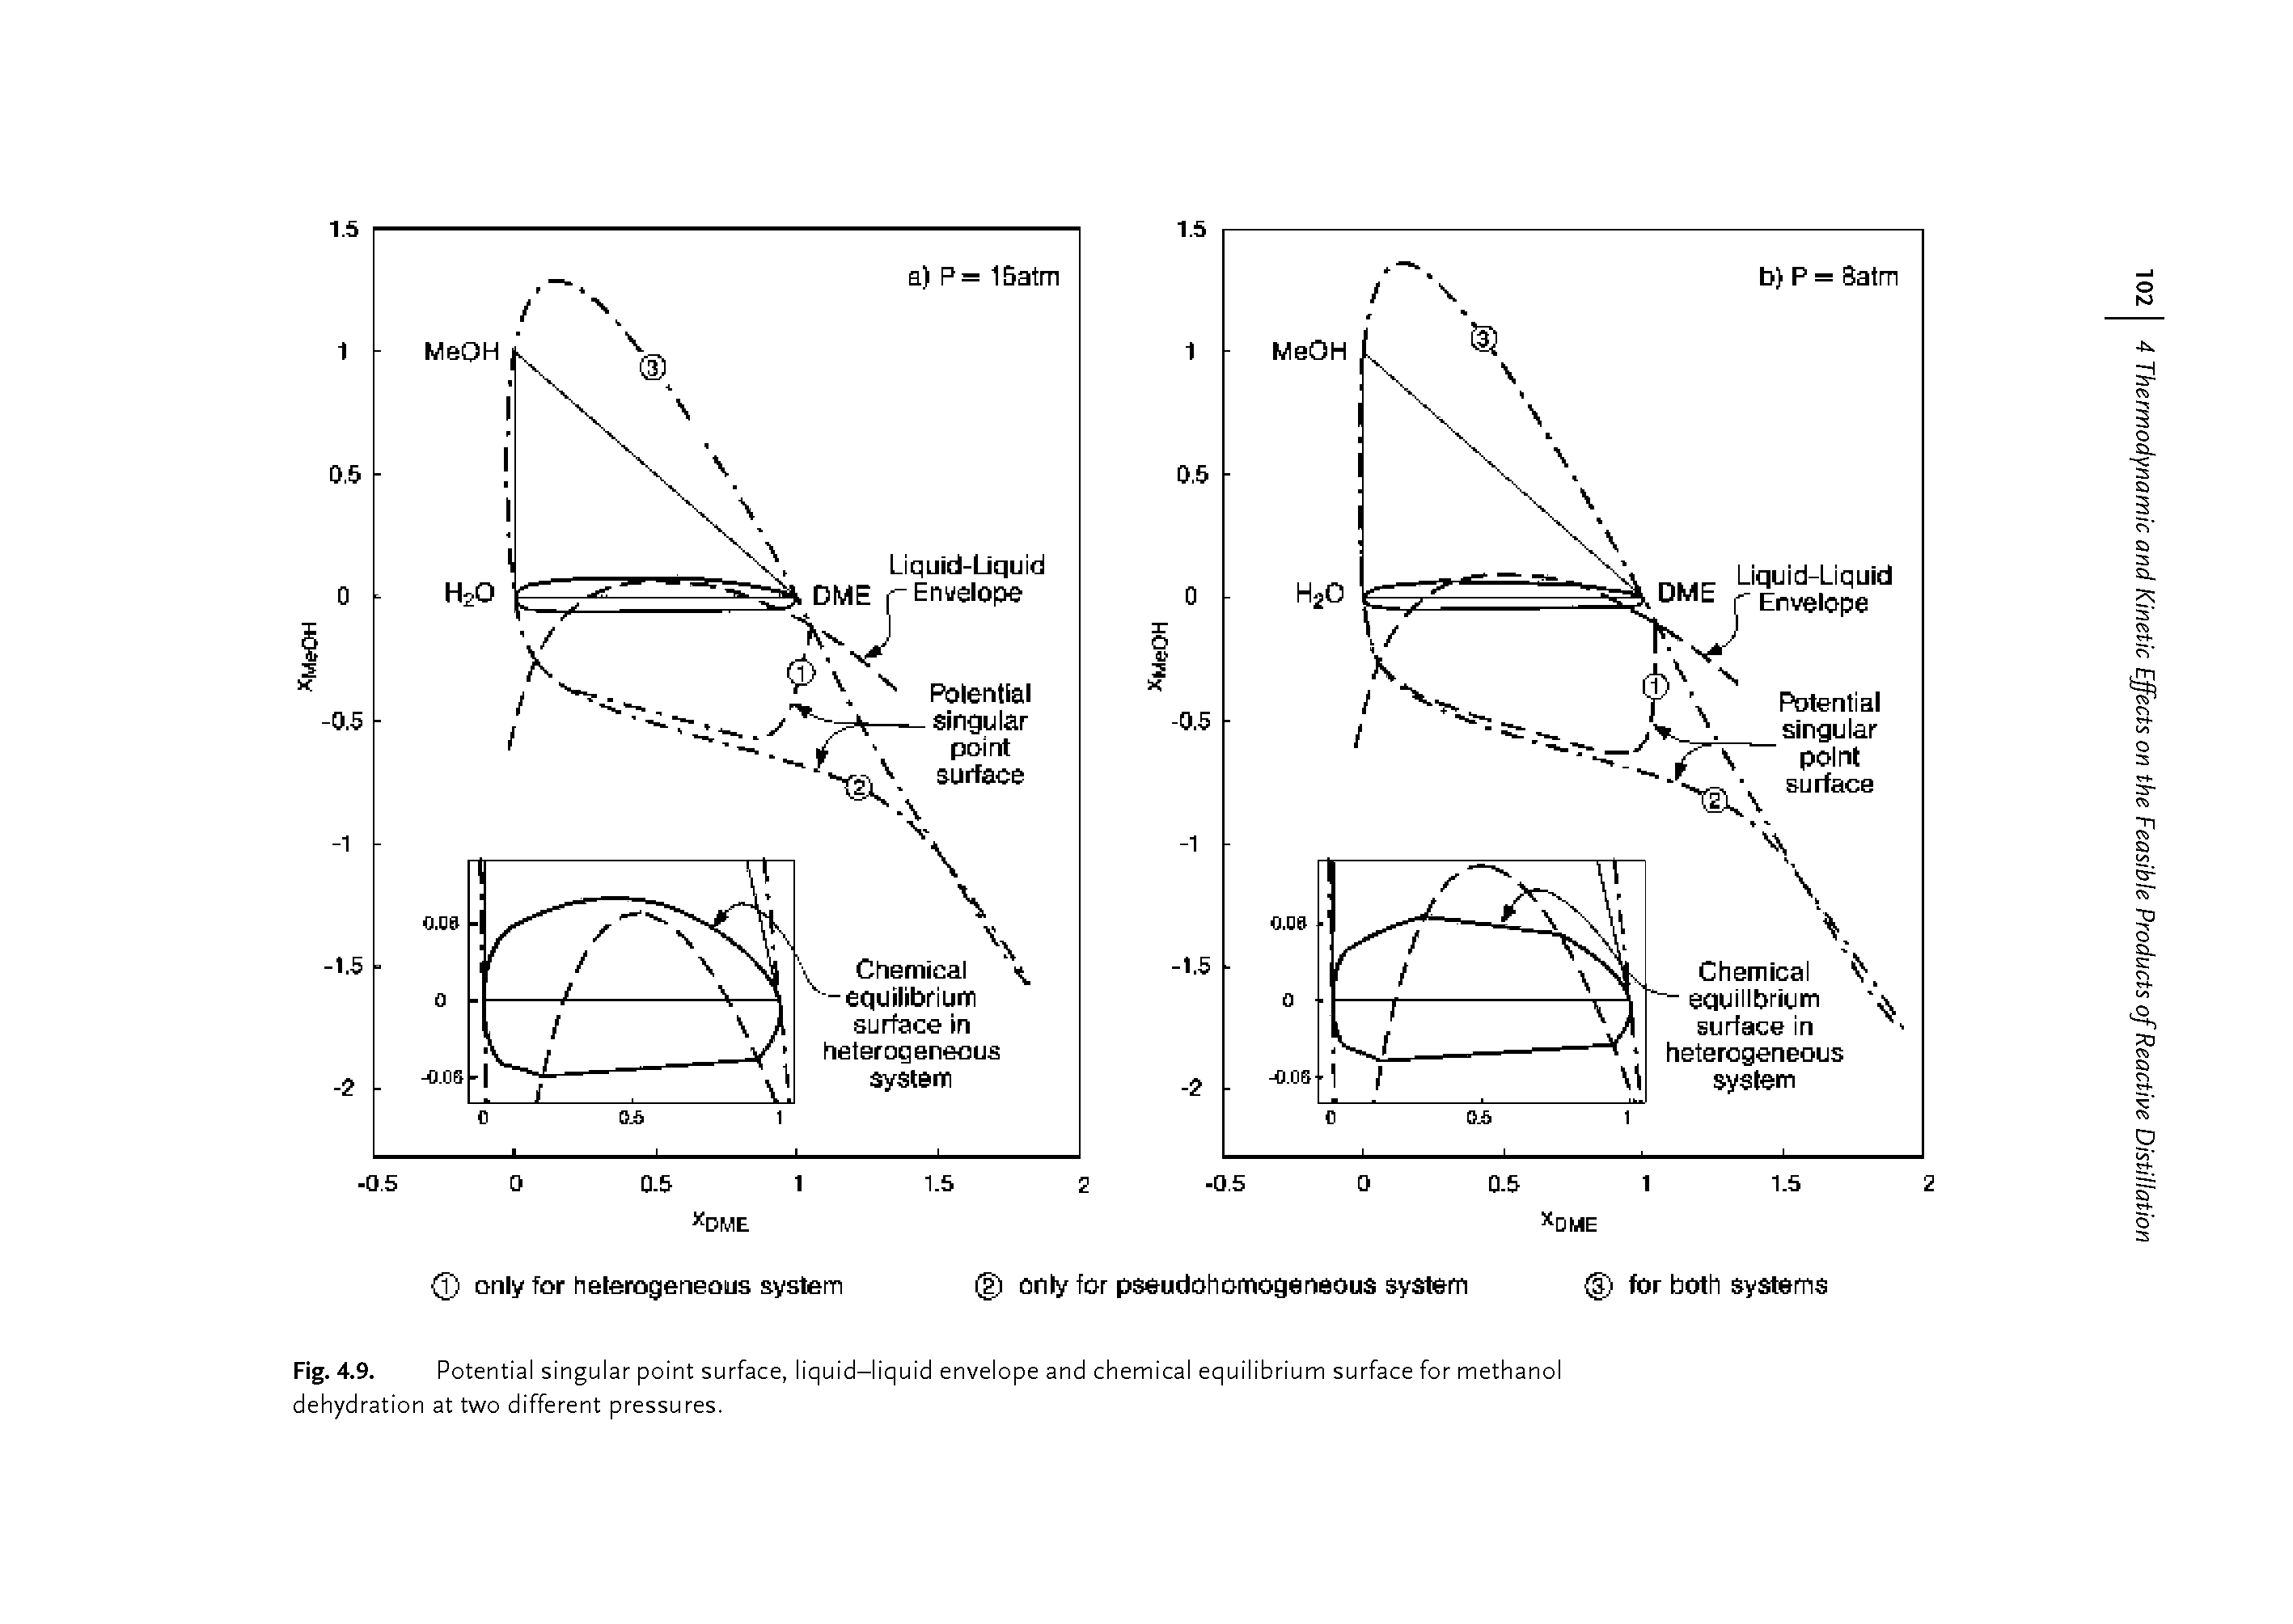 Fig. 4.9. Potential singular point surface, liquid-liquid envelope and chemical equilibrium surface for methanol dehydration at two different pressures.